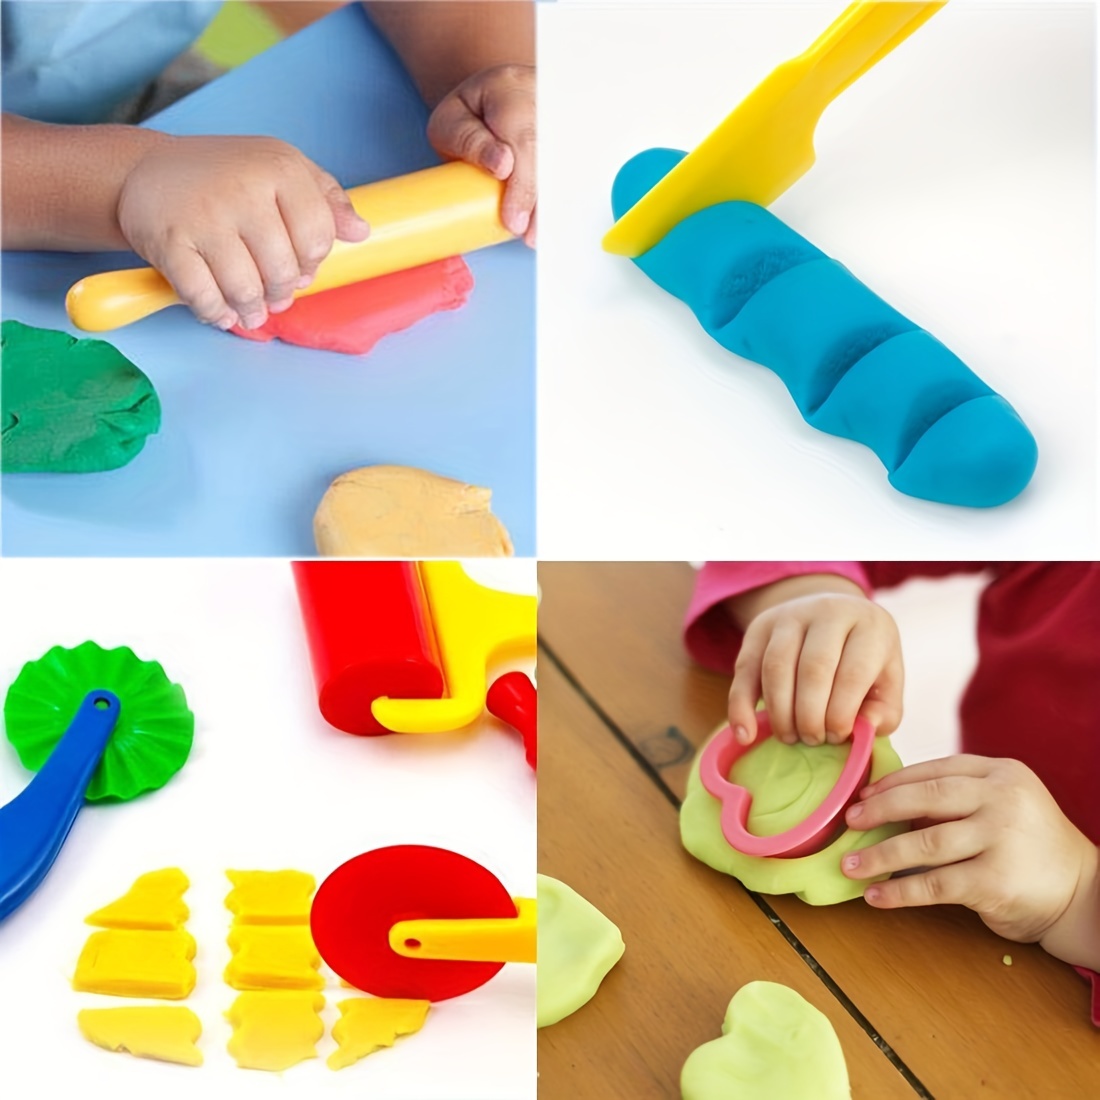 Playdoh Sets for Kids,Playdoh Tools for Toddlers,Playdoh Tools